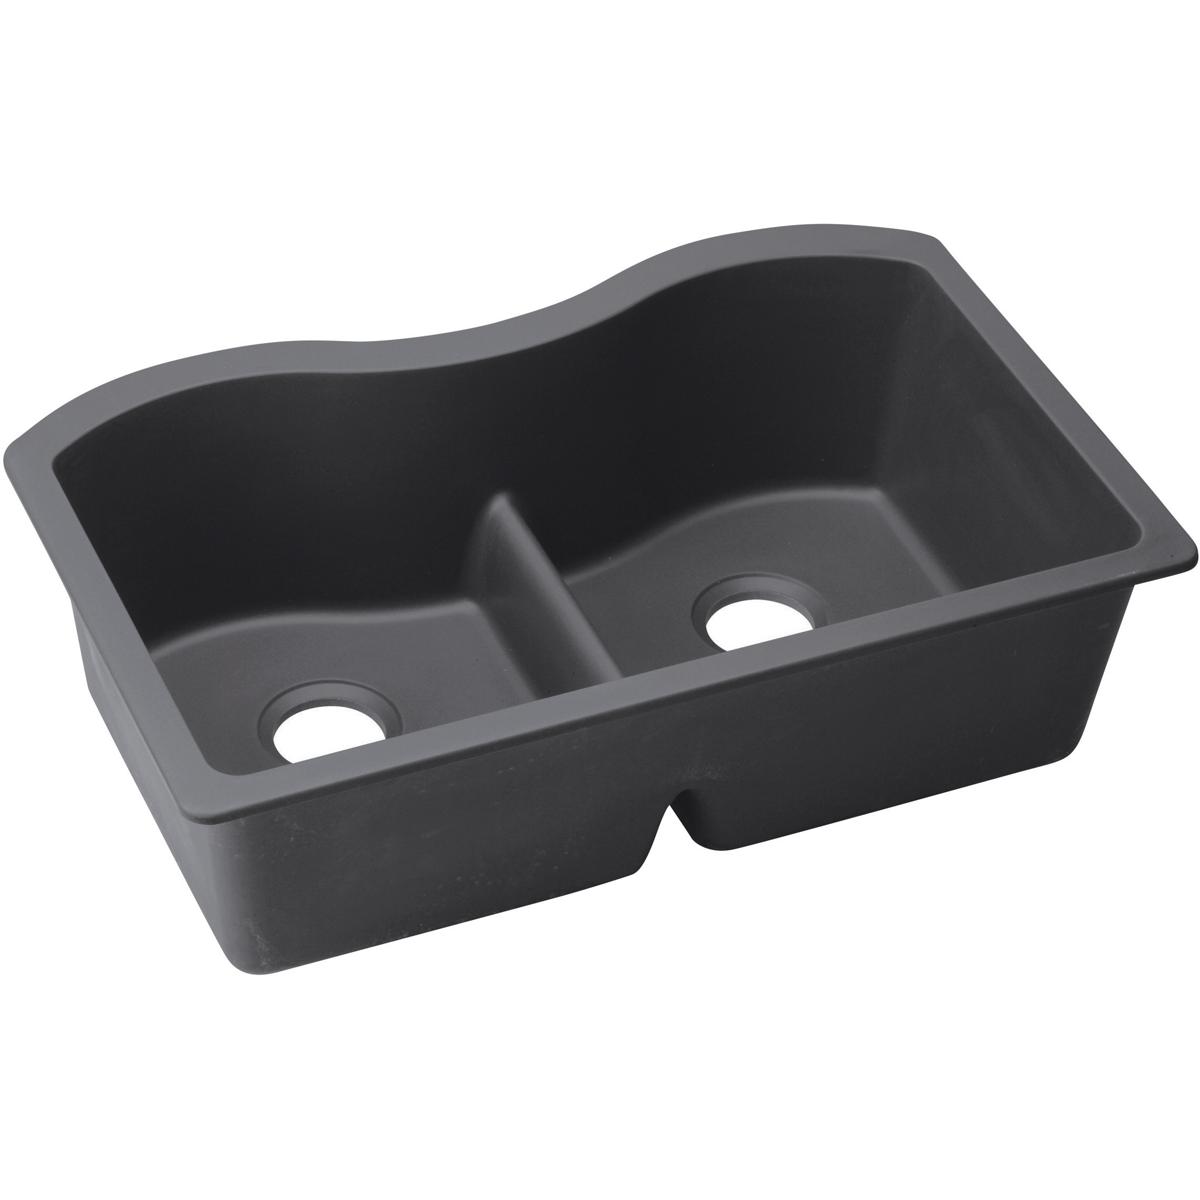 Elkay Quartz Luxe 33" x 20" x 9-1/2", Equal Double Bowl Undermount Sink with Aqua Divide, Charcoal